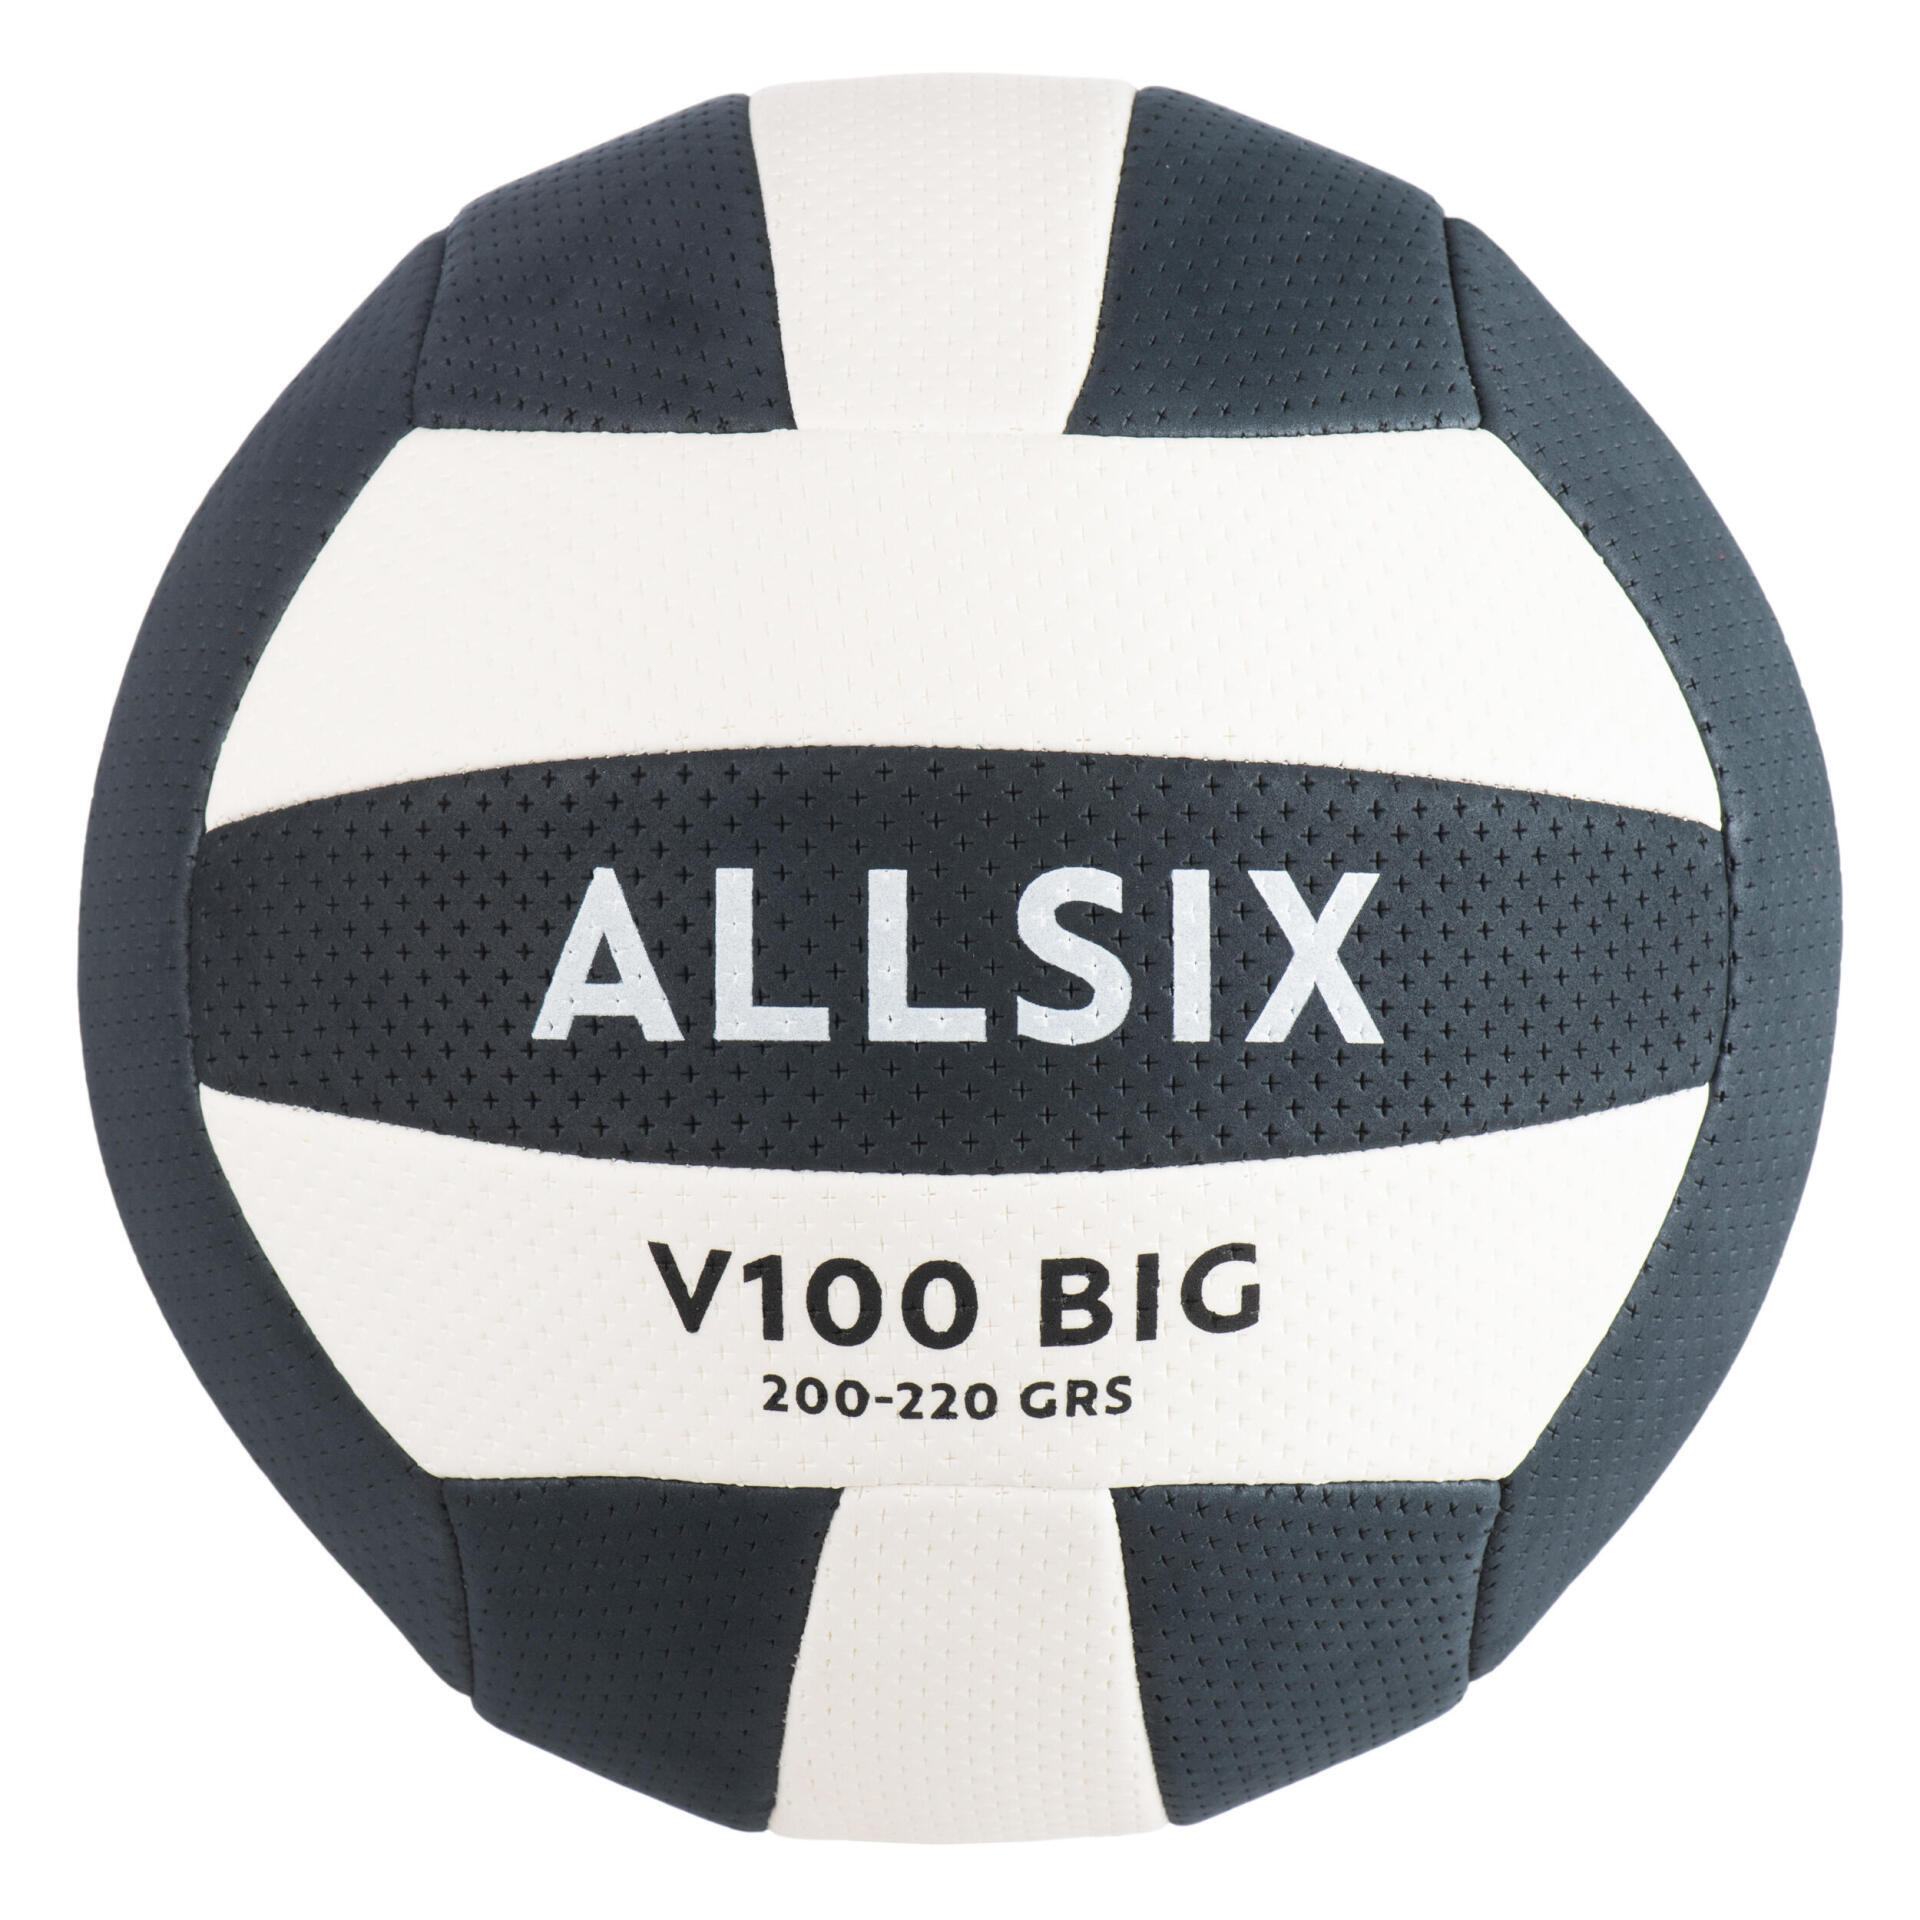 How to choose a volleyball ball